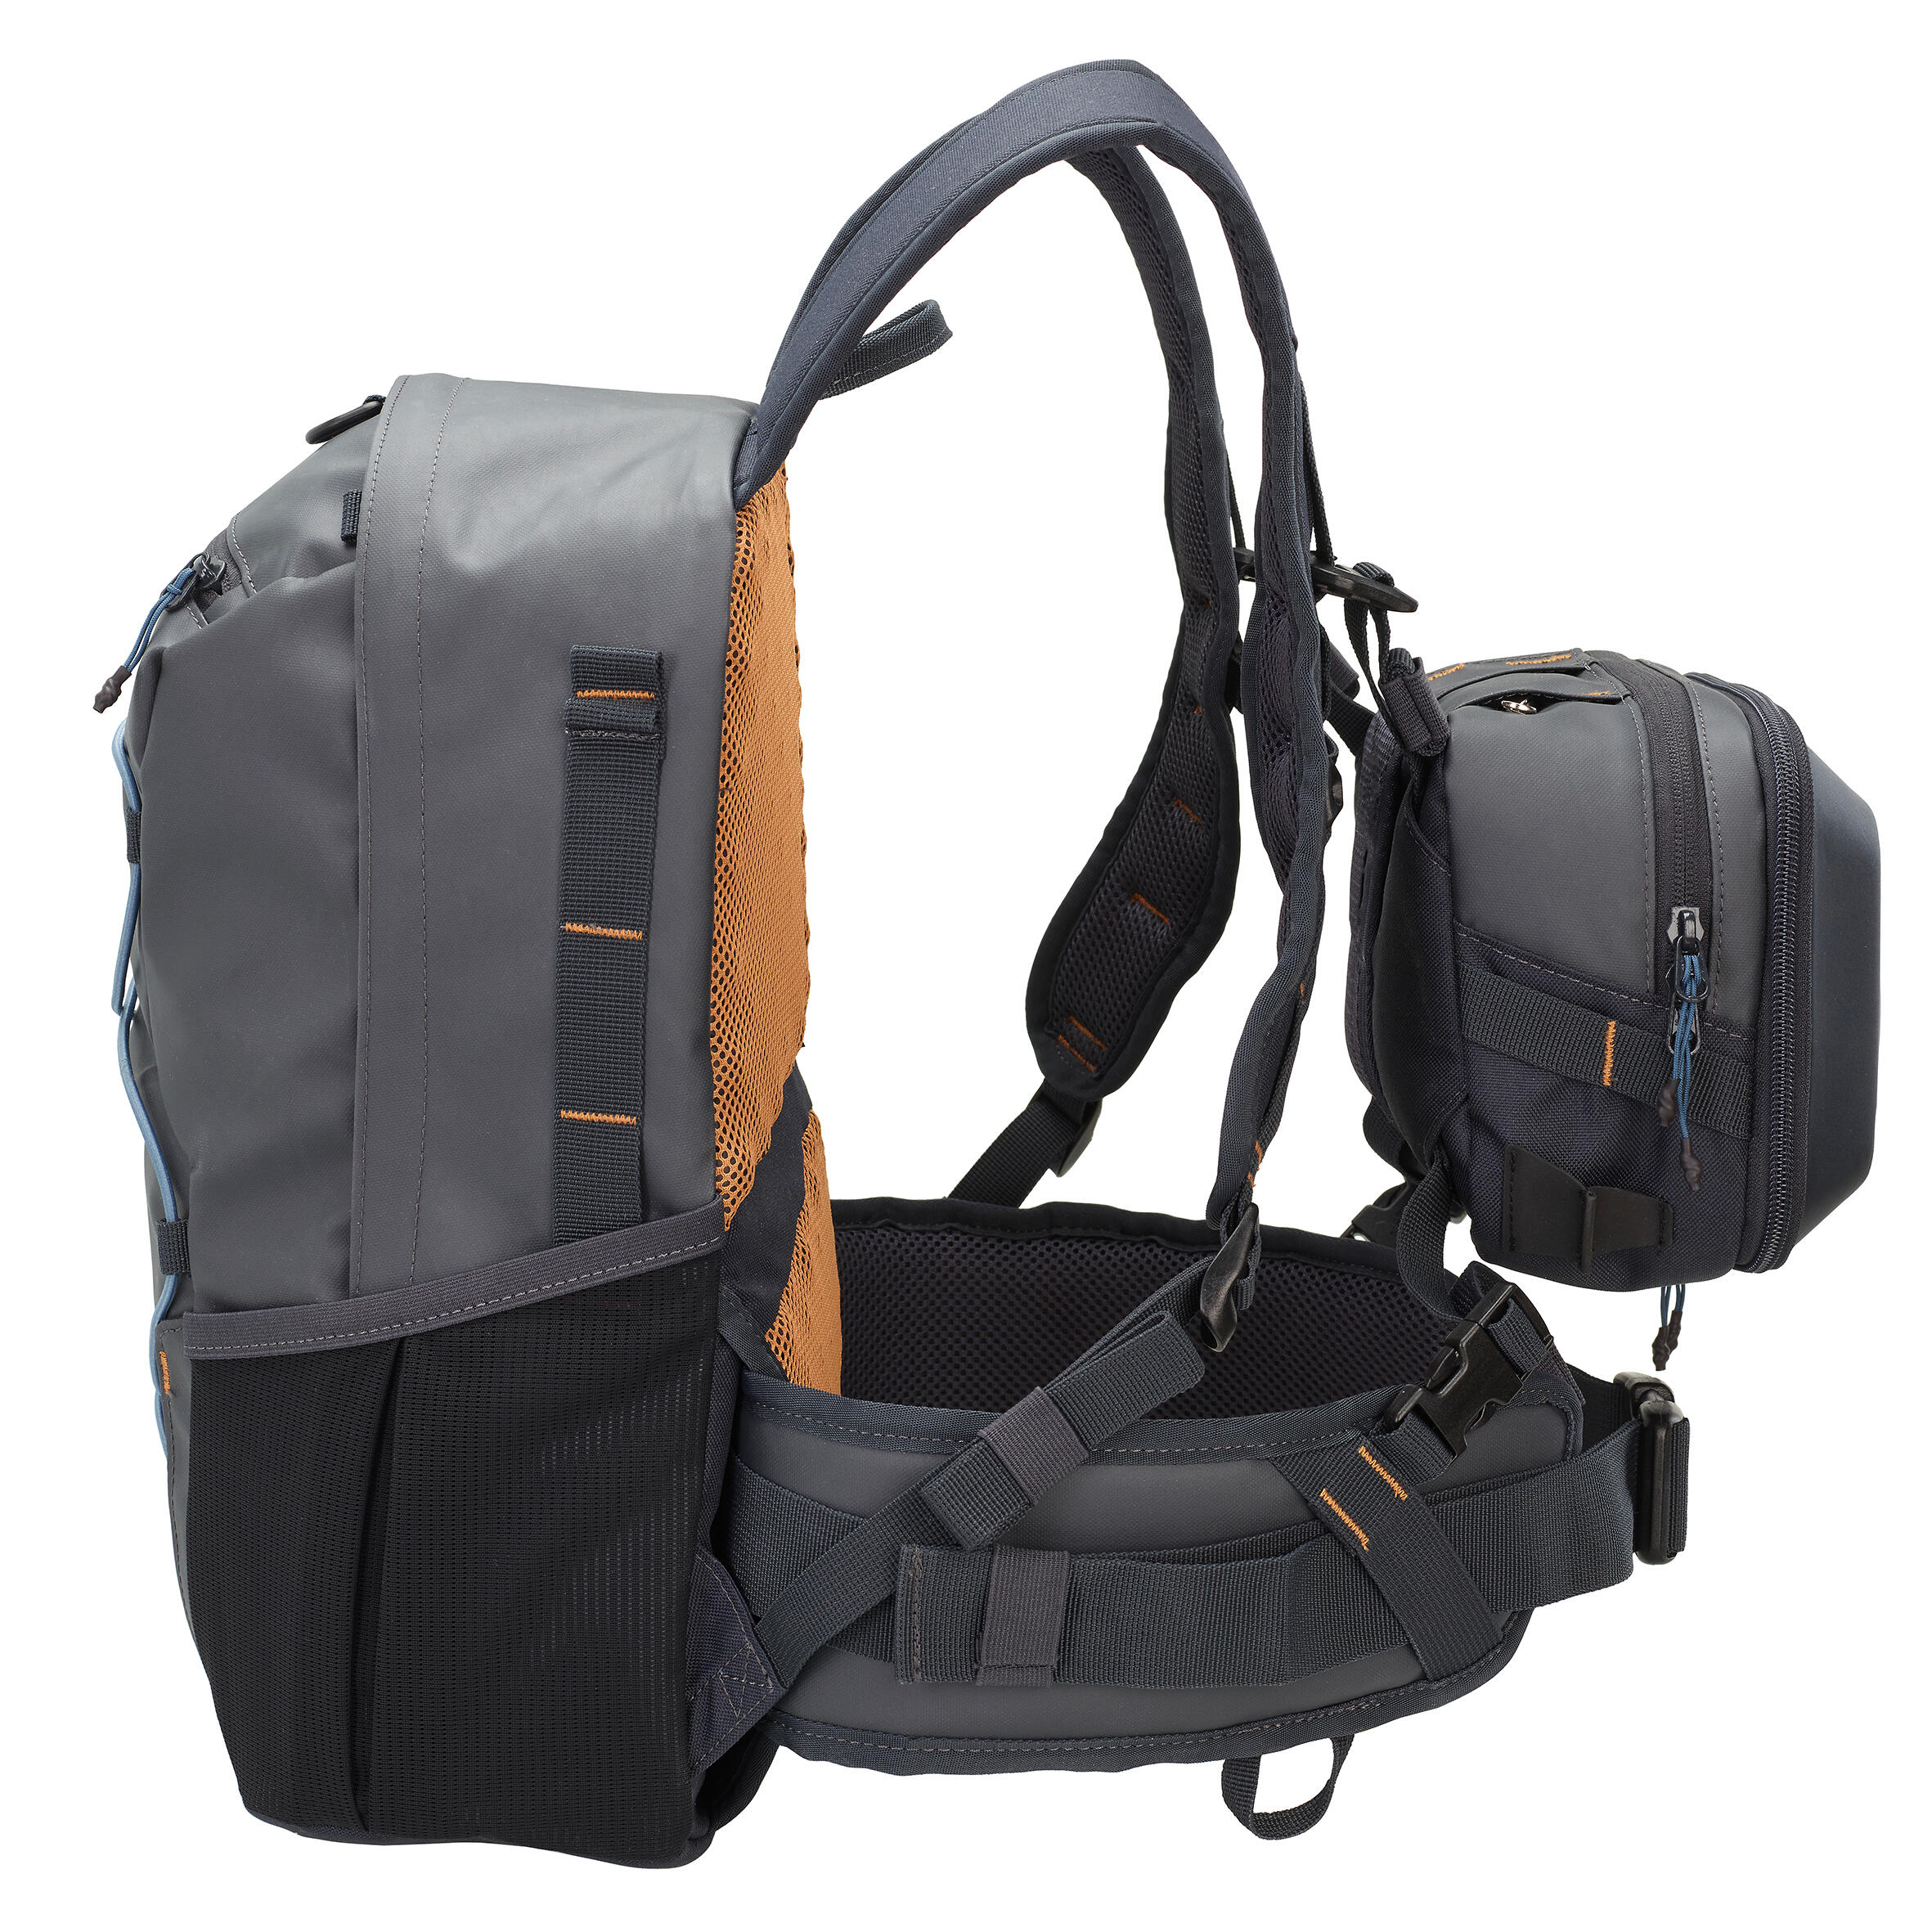 500 fishing backpack and chest pack - CAPERLAN